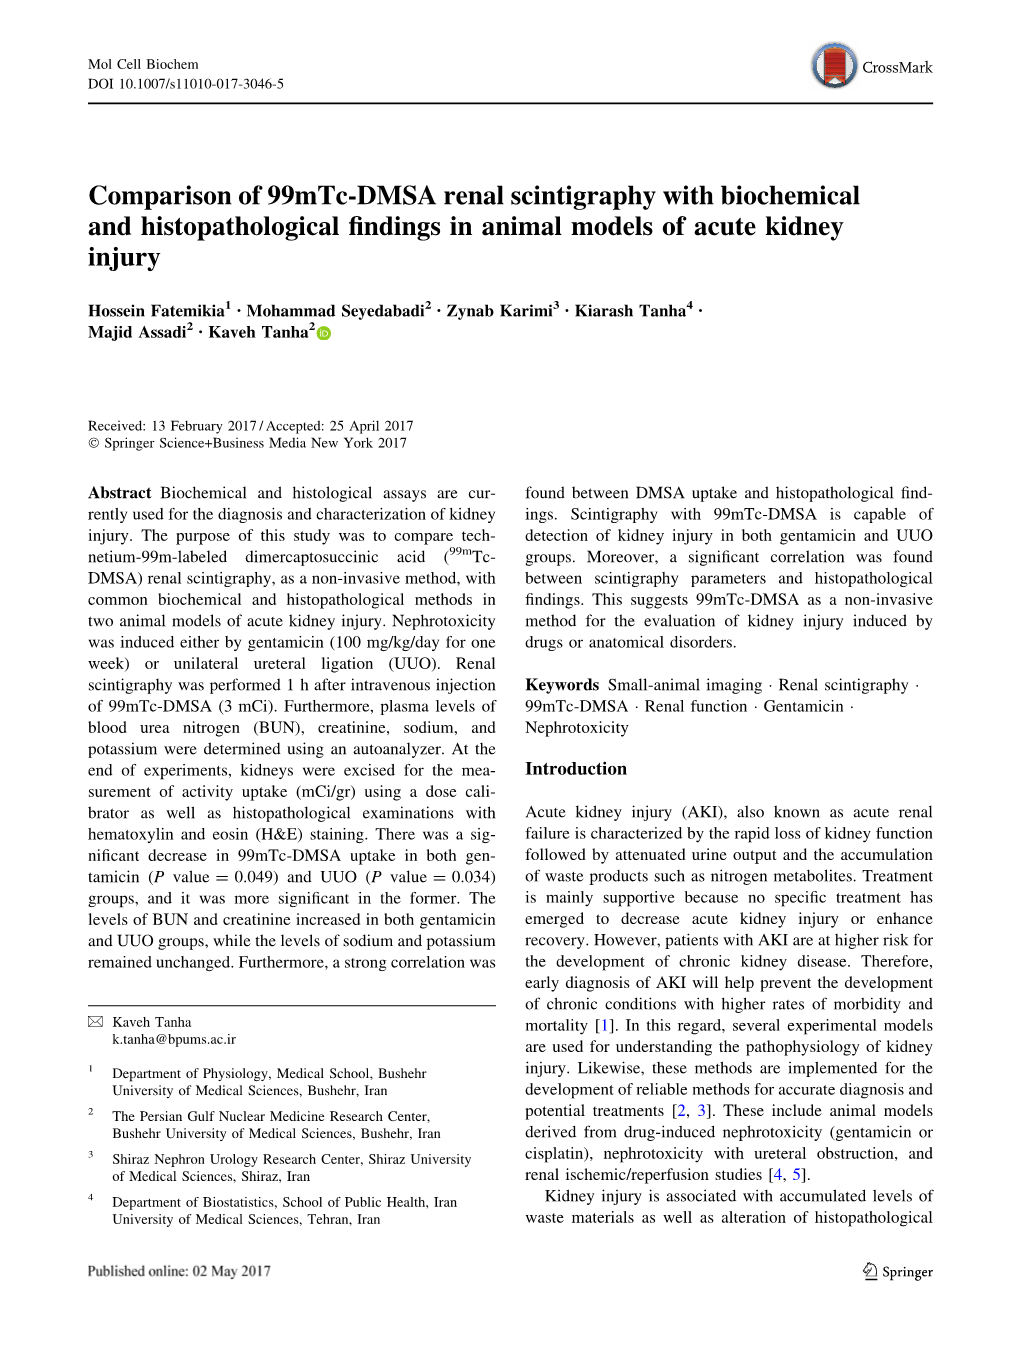 Comparison of 99Mtc-DMSA Renal Scintigraphy with Biochemical and Histopathological ﬁndings in Animal Models of Acute Kidney Injury